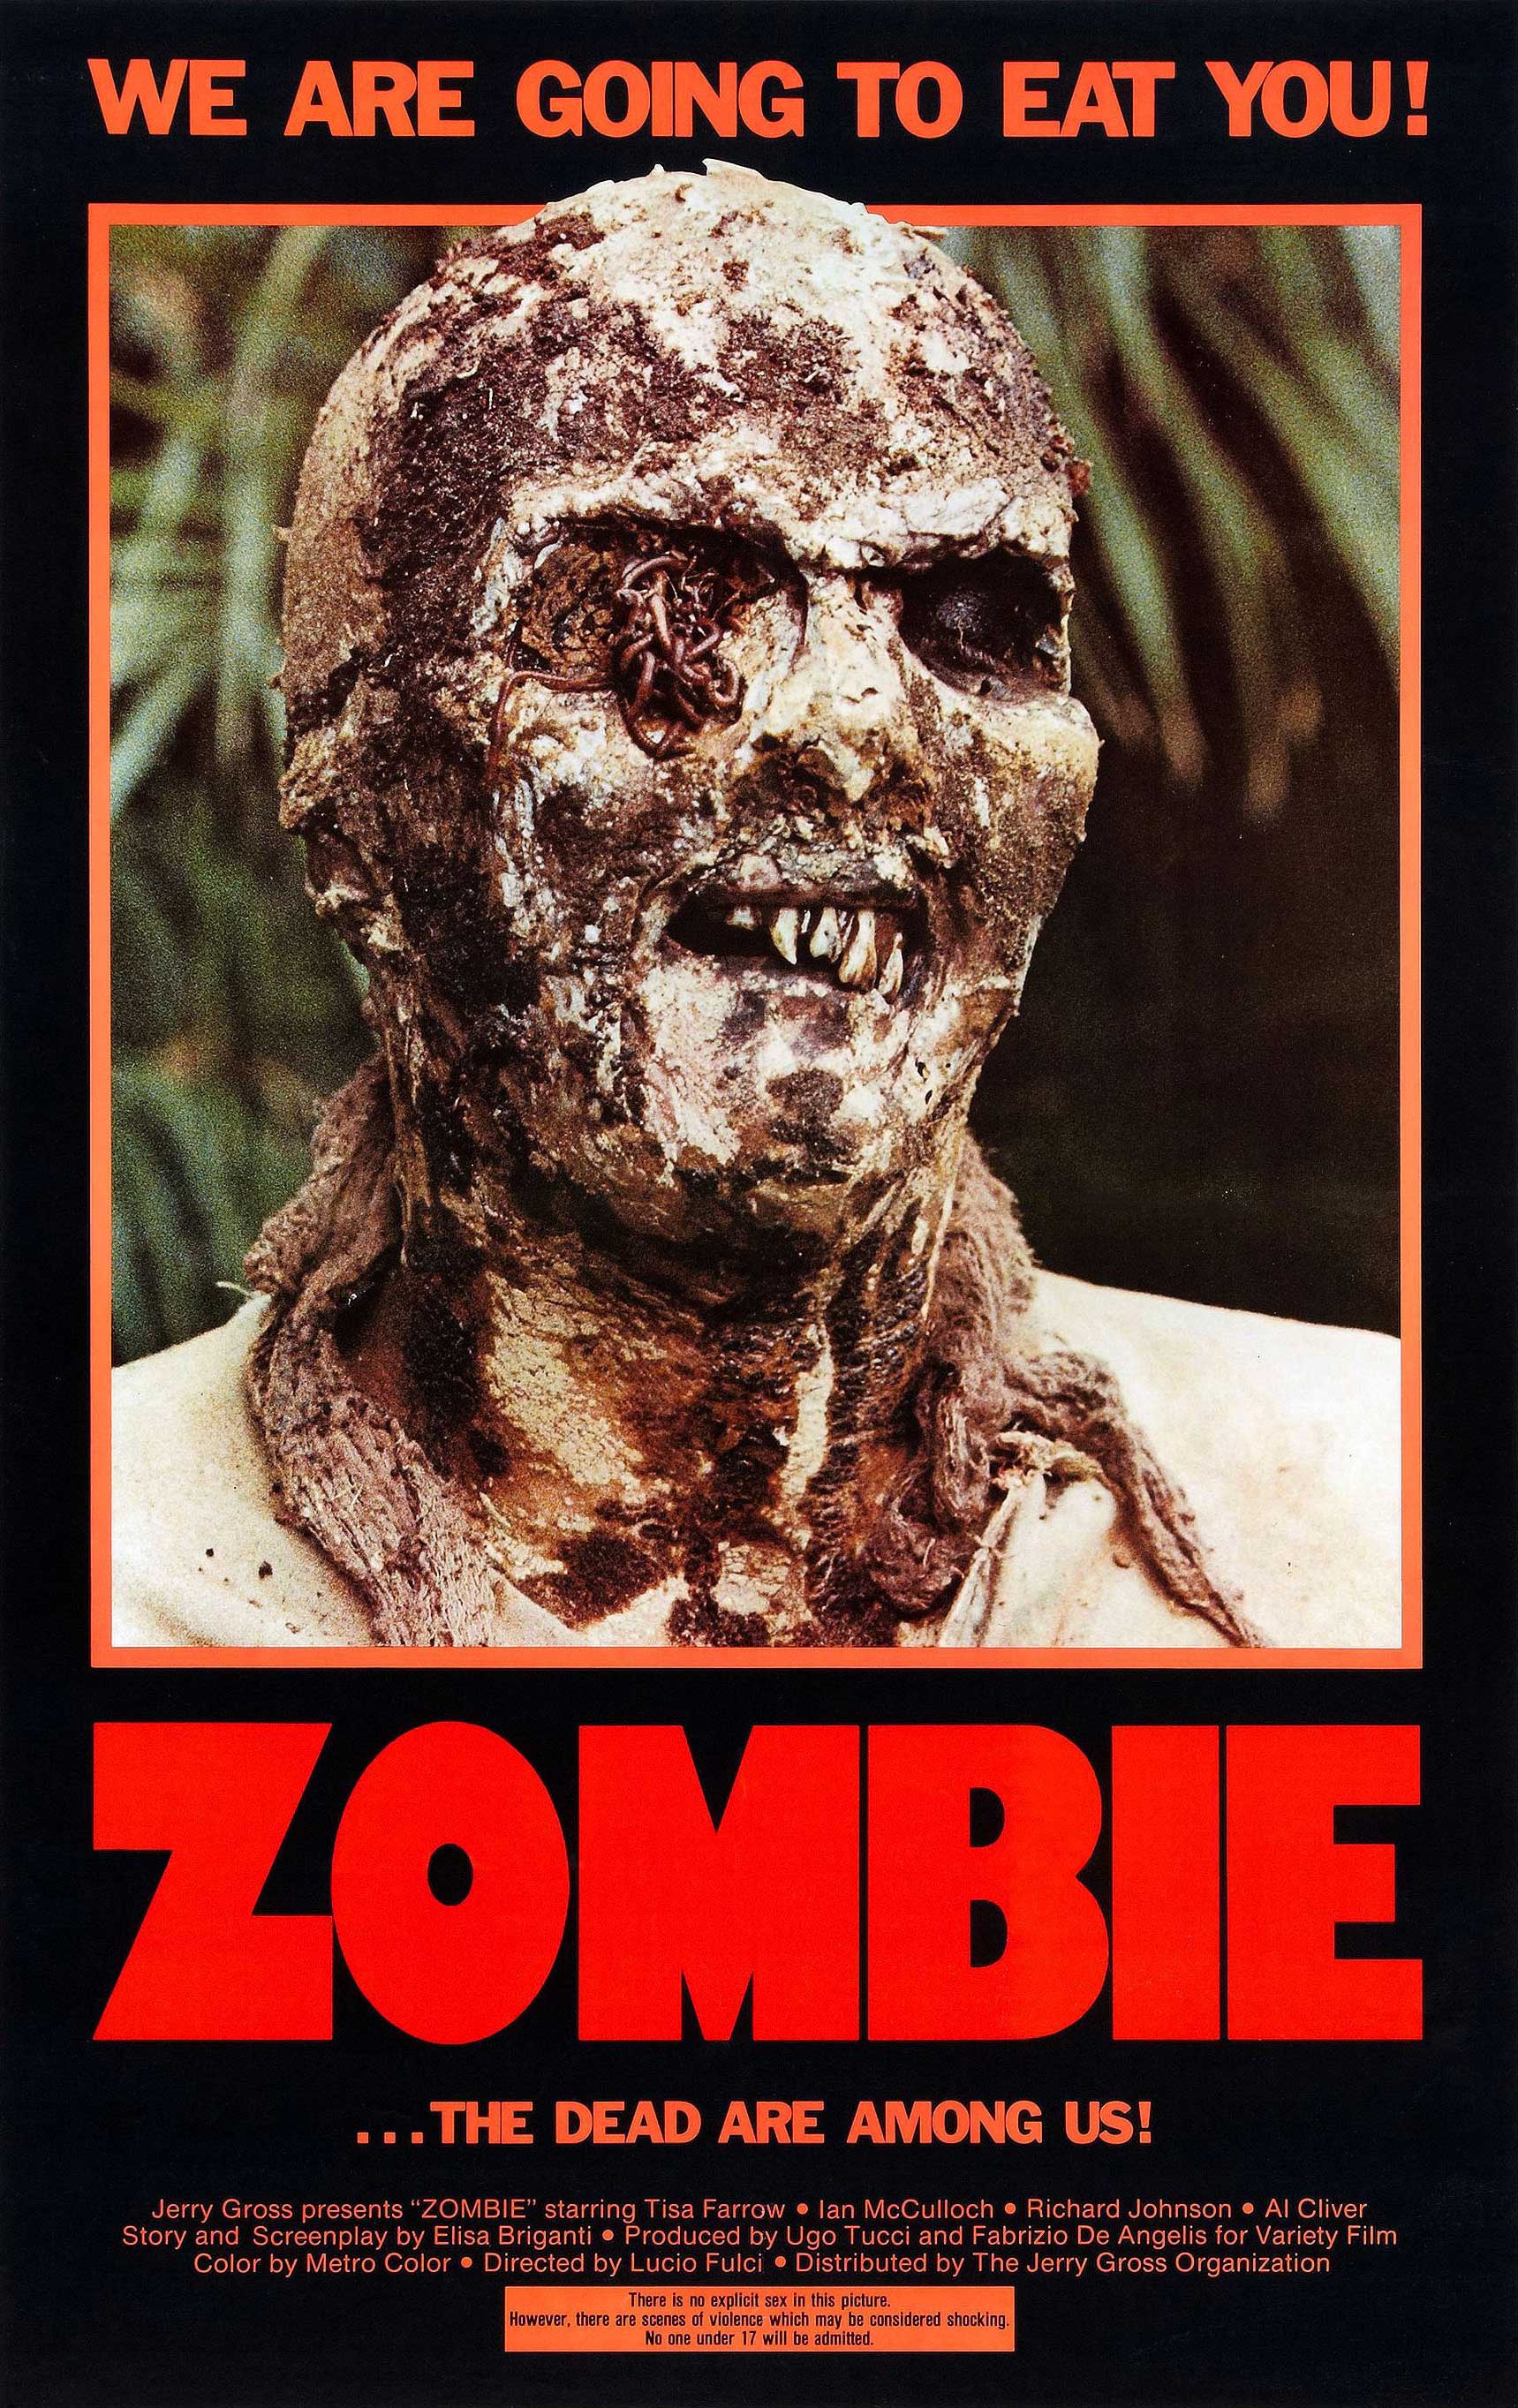 Zombie (1979) with English Subtitles on DVD on DVD